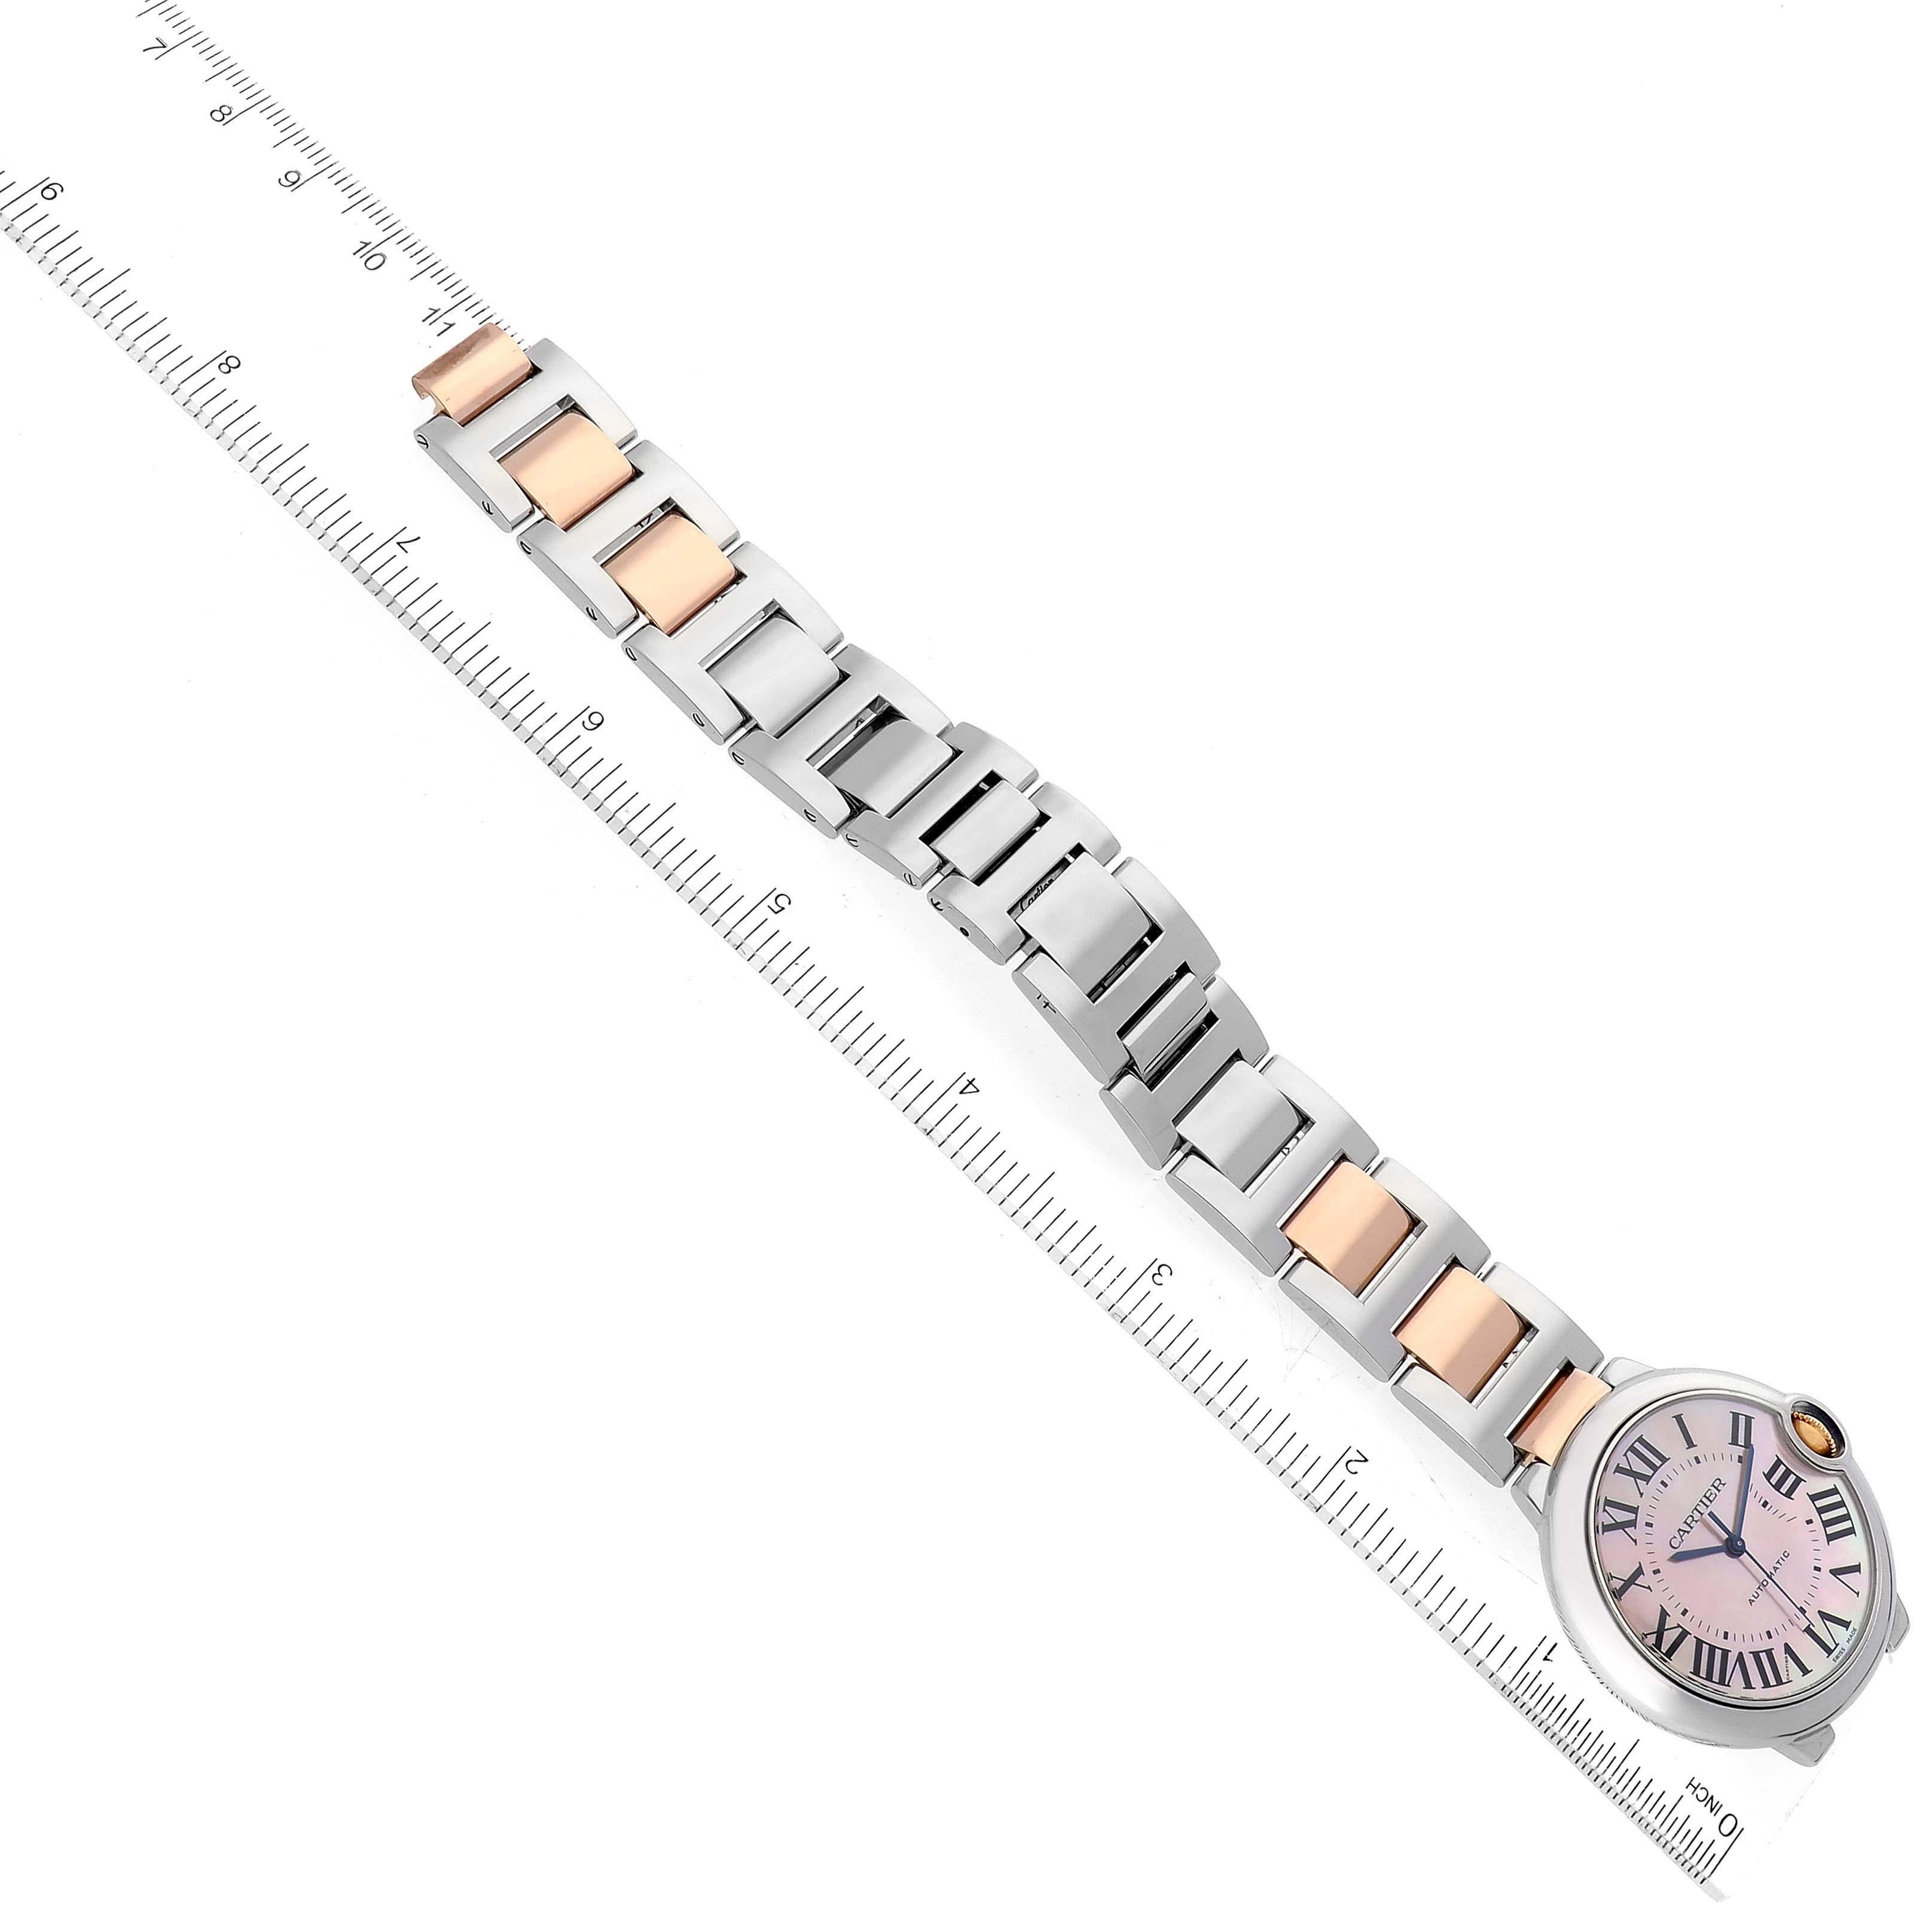 Cartier Ballon Bleu Steel Rose Gold Mother of Pearl Ladies Watch W6920033 Papers 2